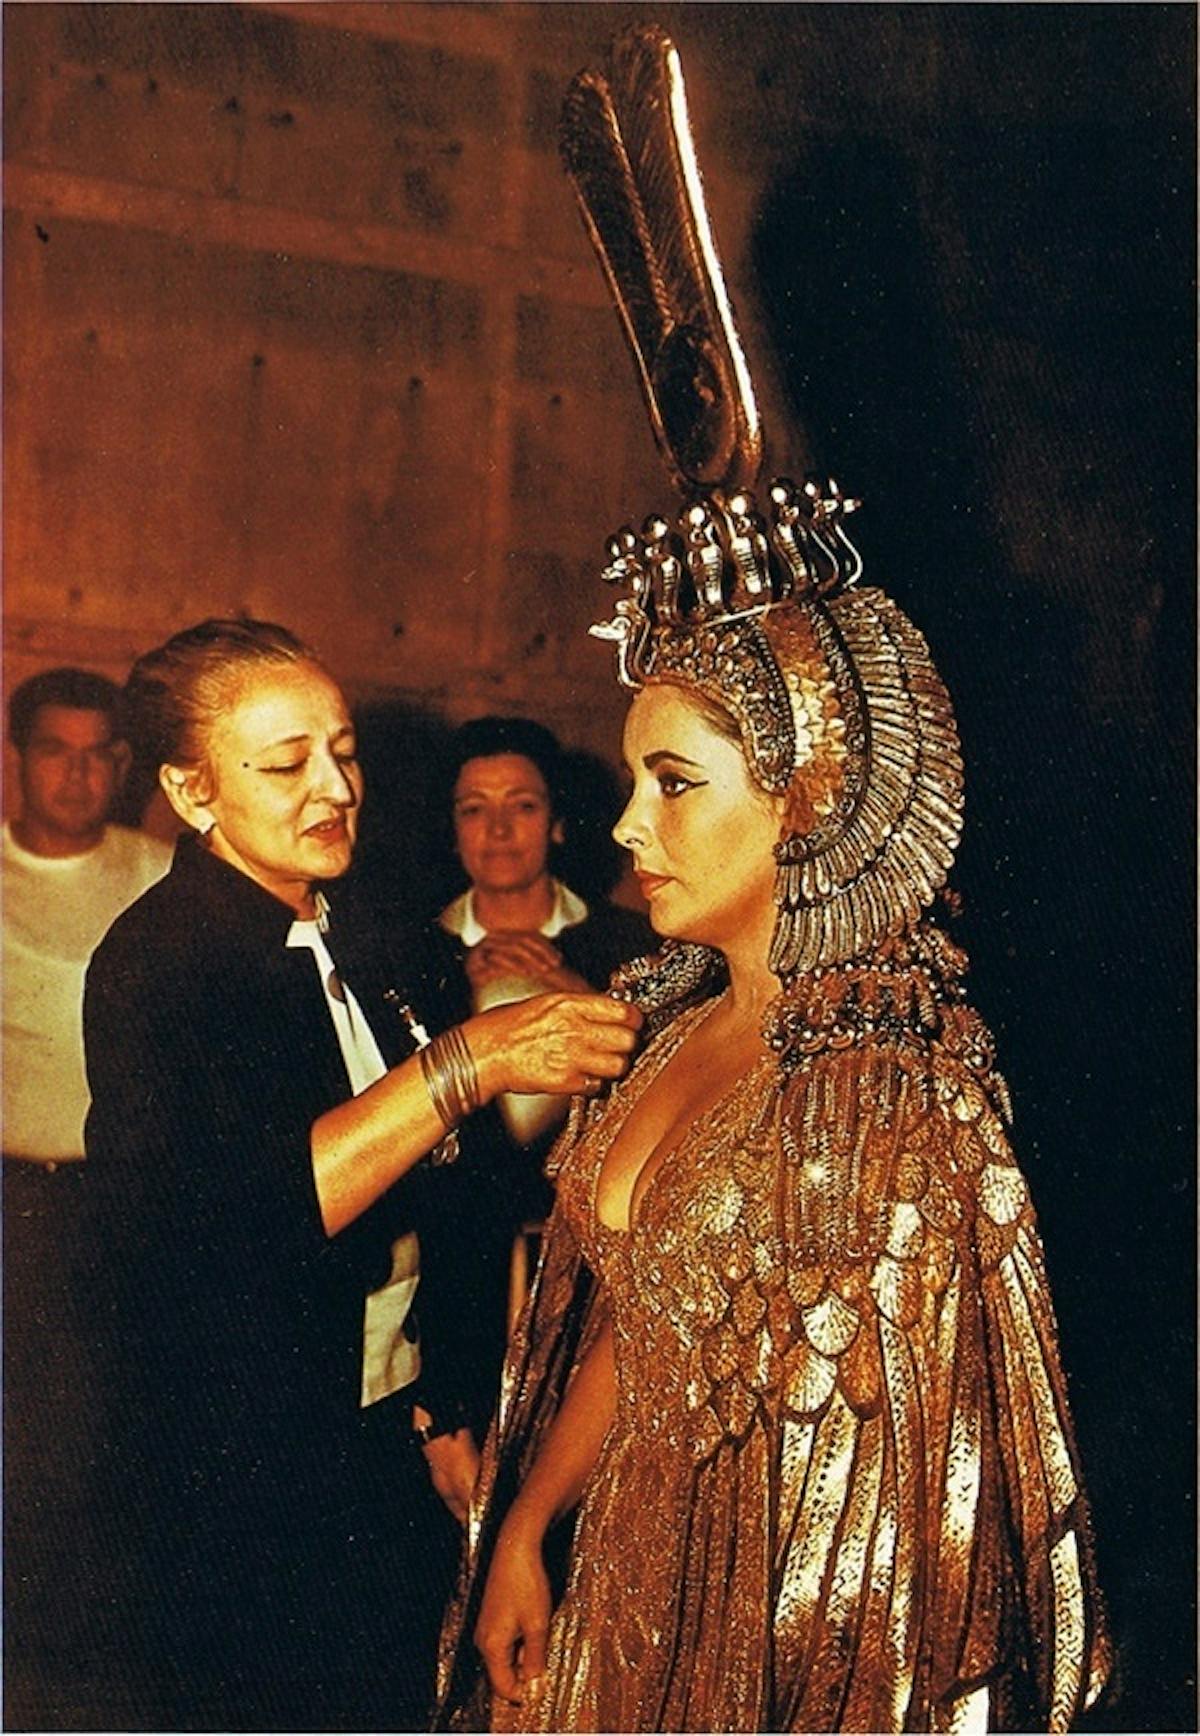  Irene Sharaff working with Elizabeth Taylor on the set of Cleopatra